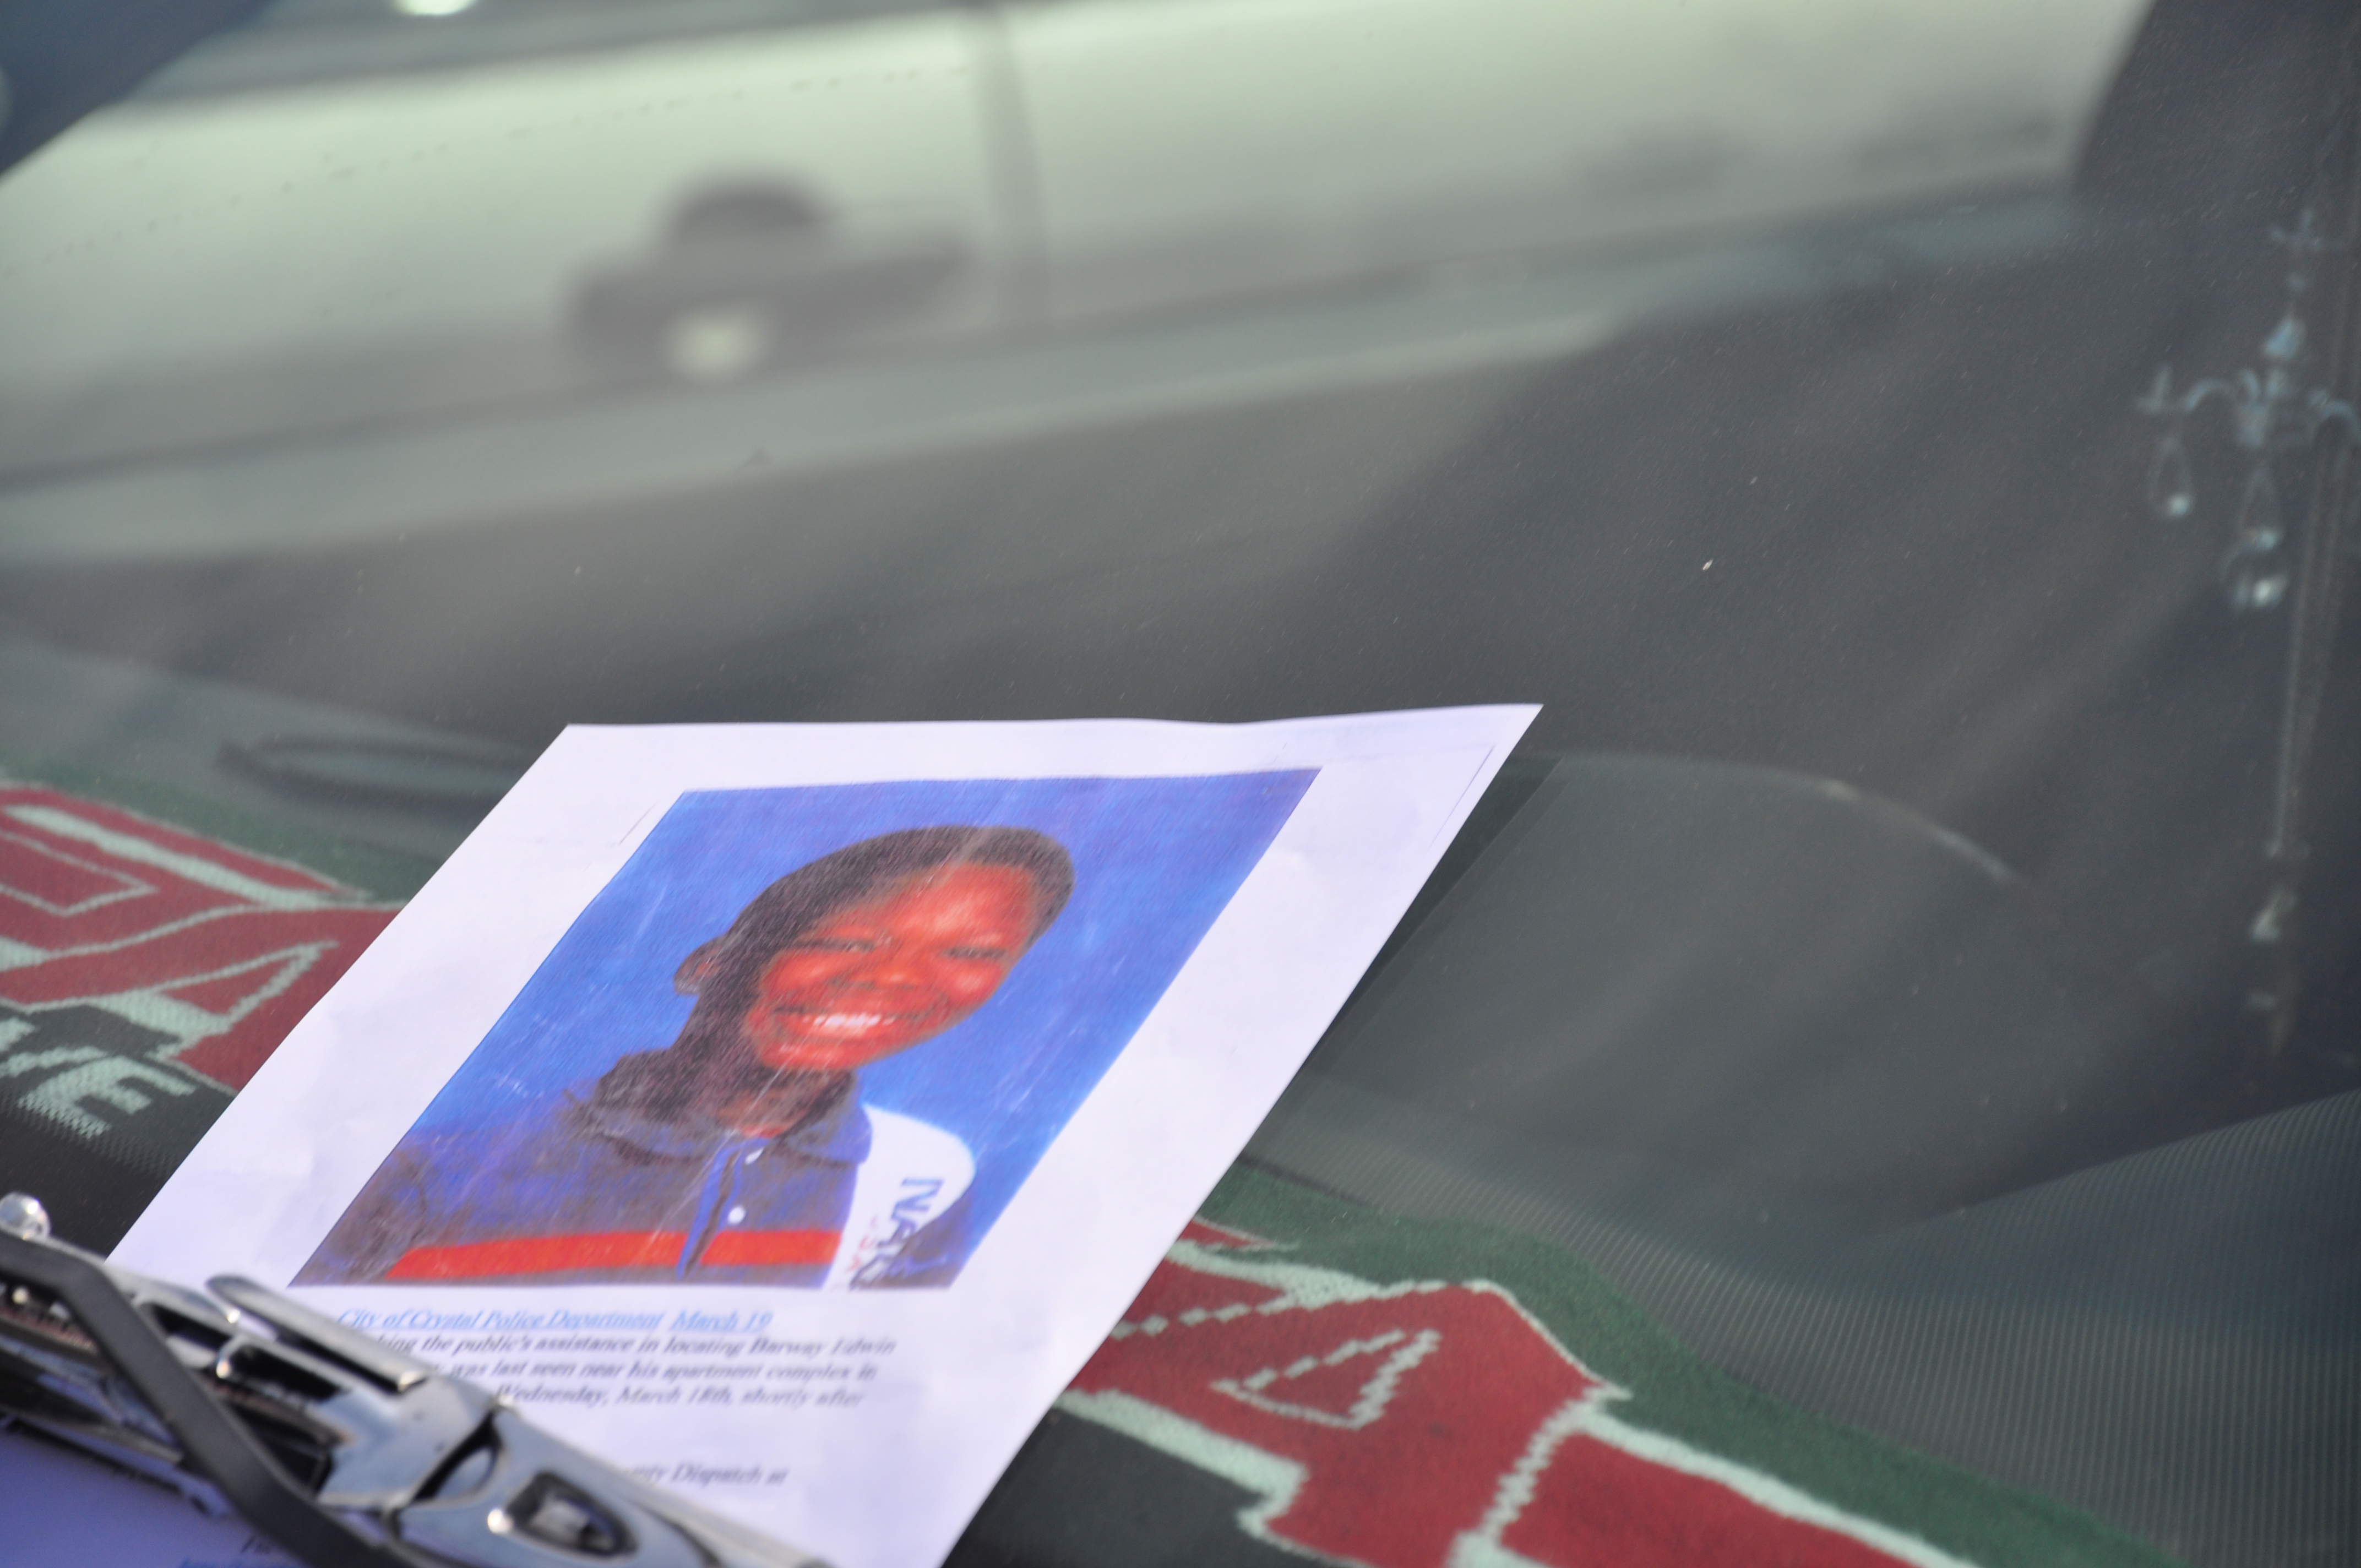 Searching for missing 10 year-old Barway Collins. All photos, Issa Mansaray, The AfricaPaper. (c) 2015.